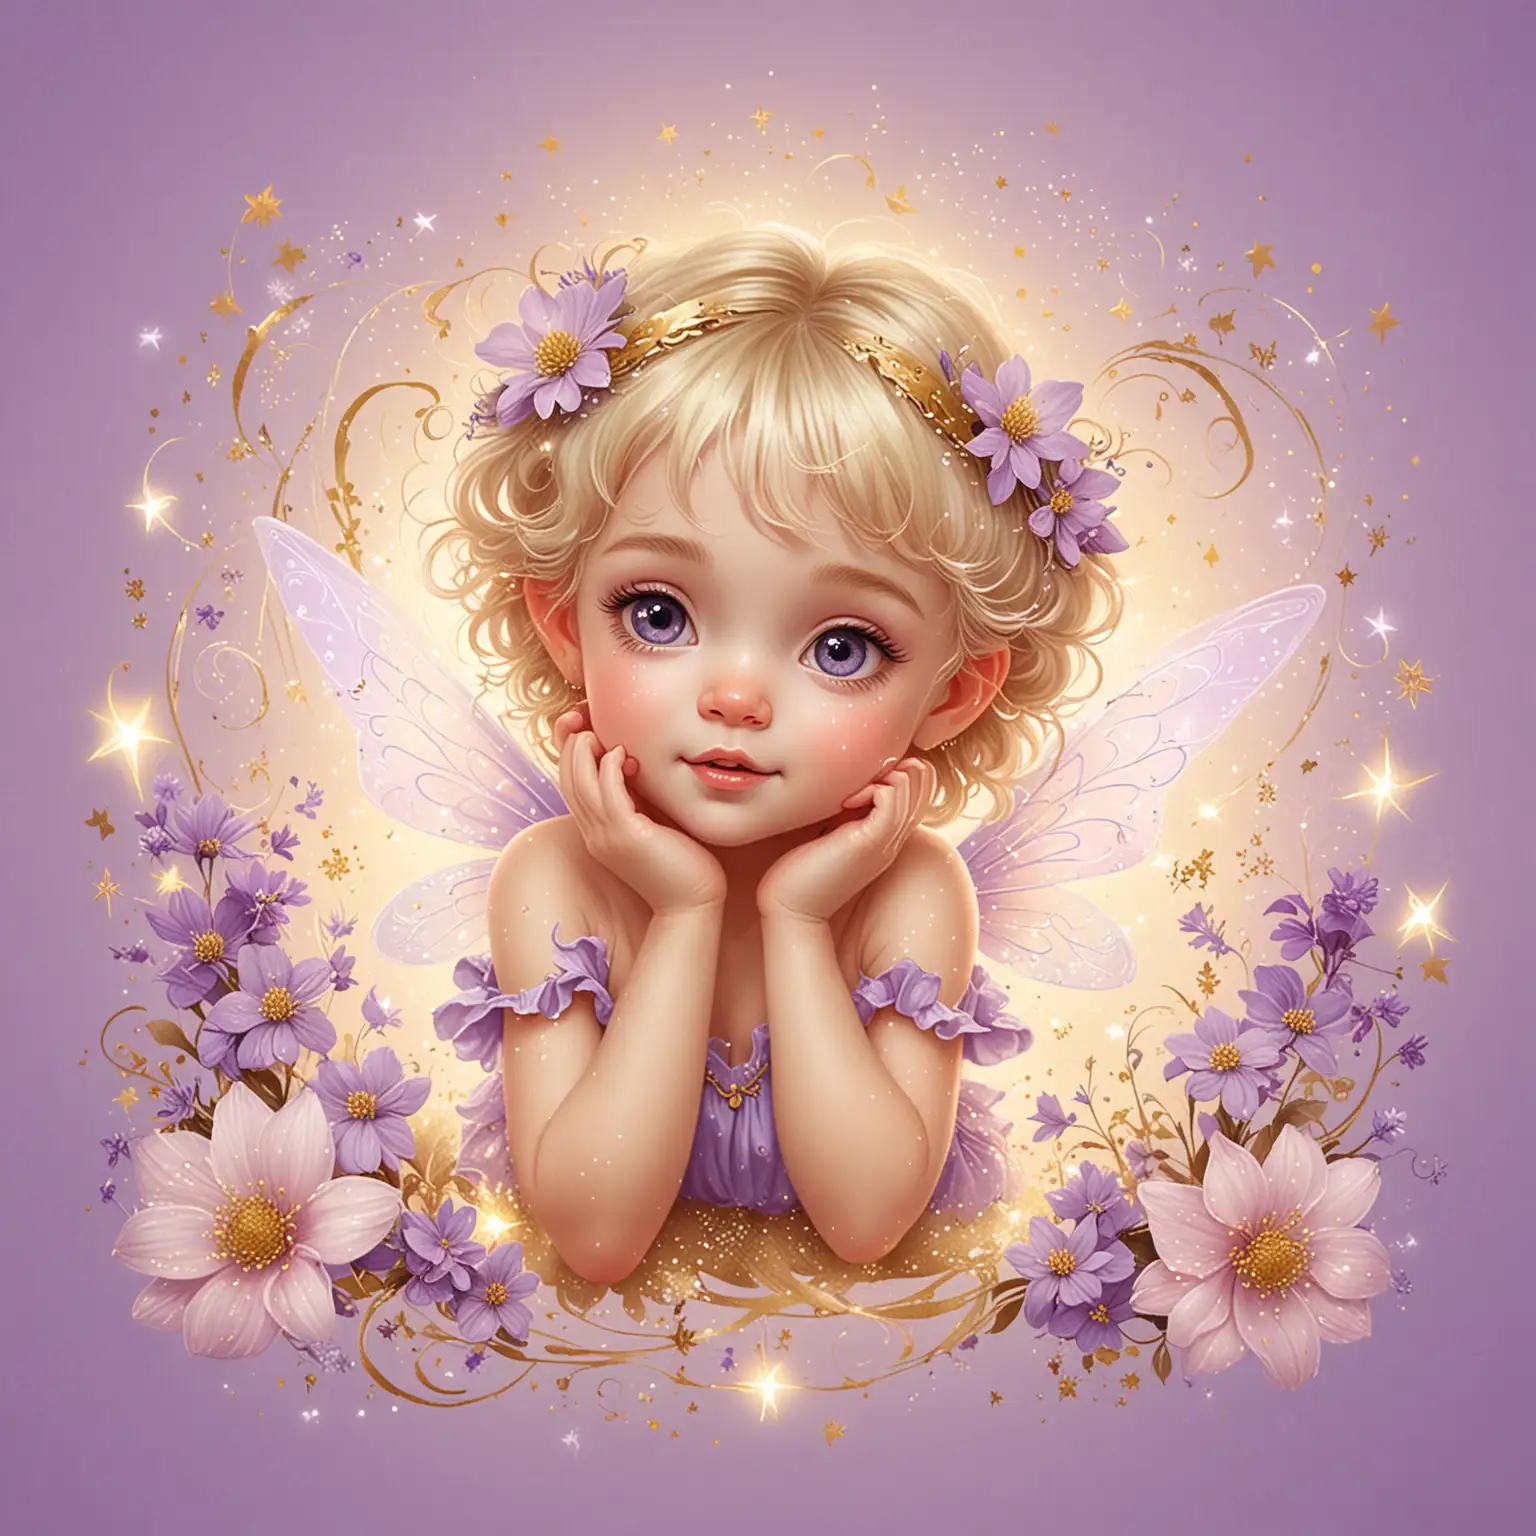 Illustration of a cute light-haired baby girl fairy,  magic swirls, gold sparks, flowers, pastel purple background 